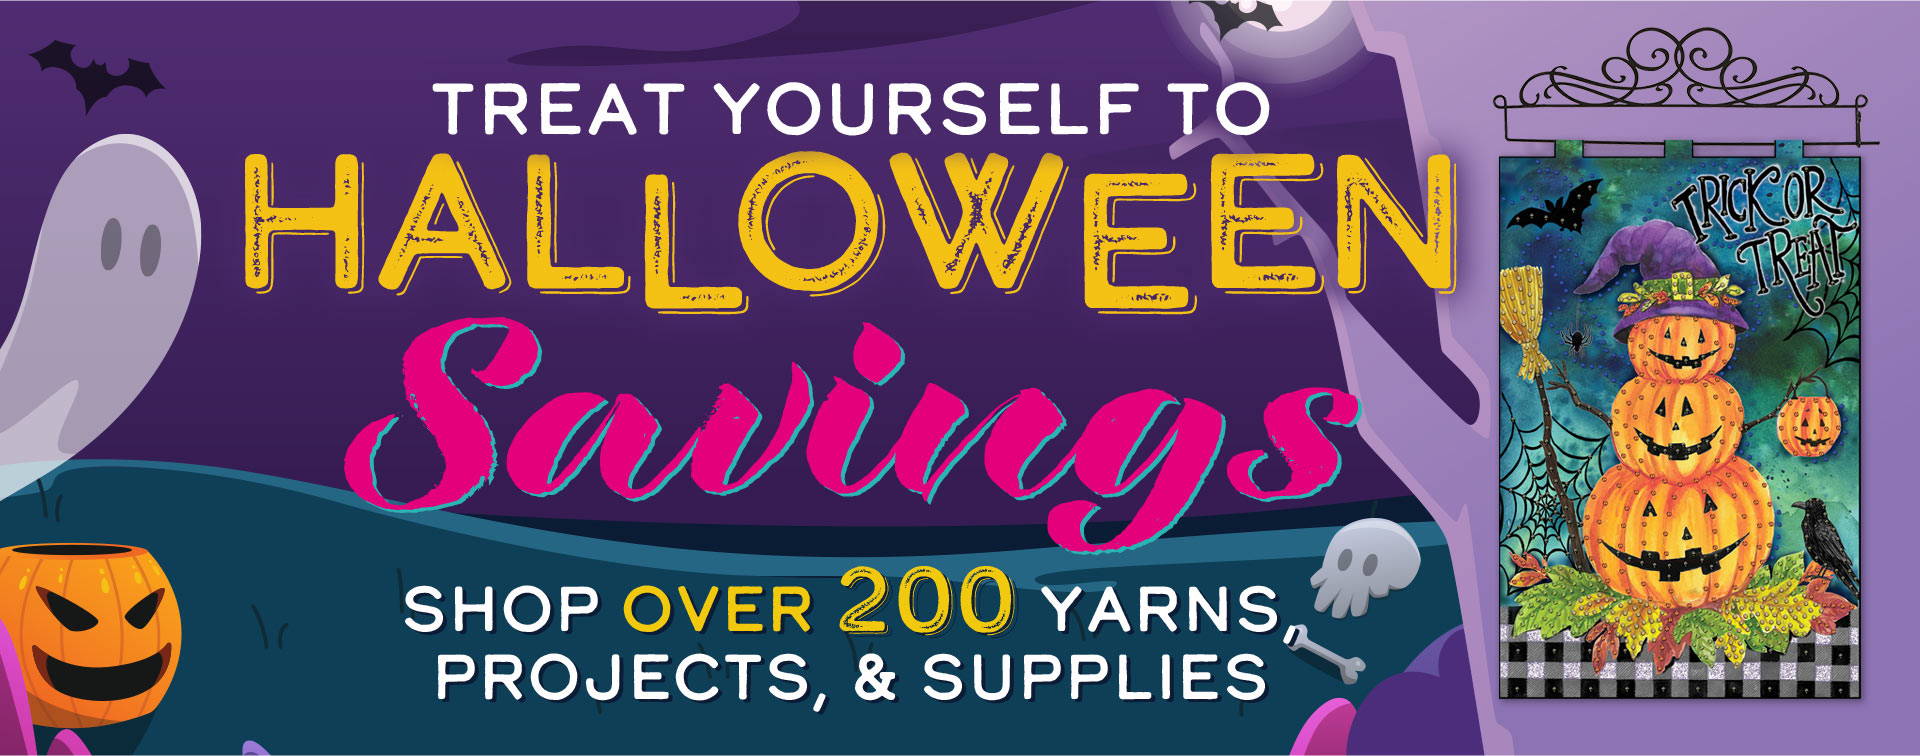 Treat yourself to Halloween Savings. Shop over 200 yarns, projects, and supplies.